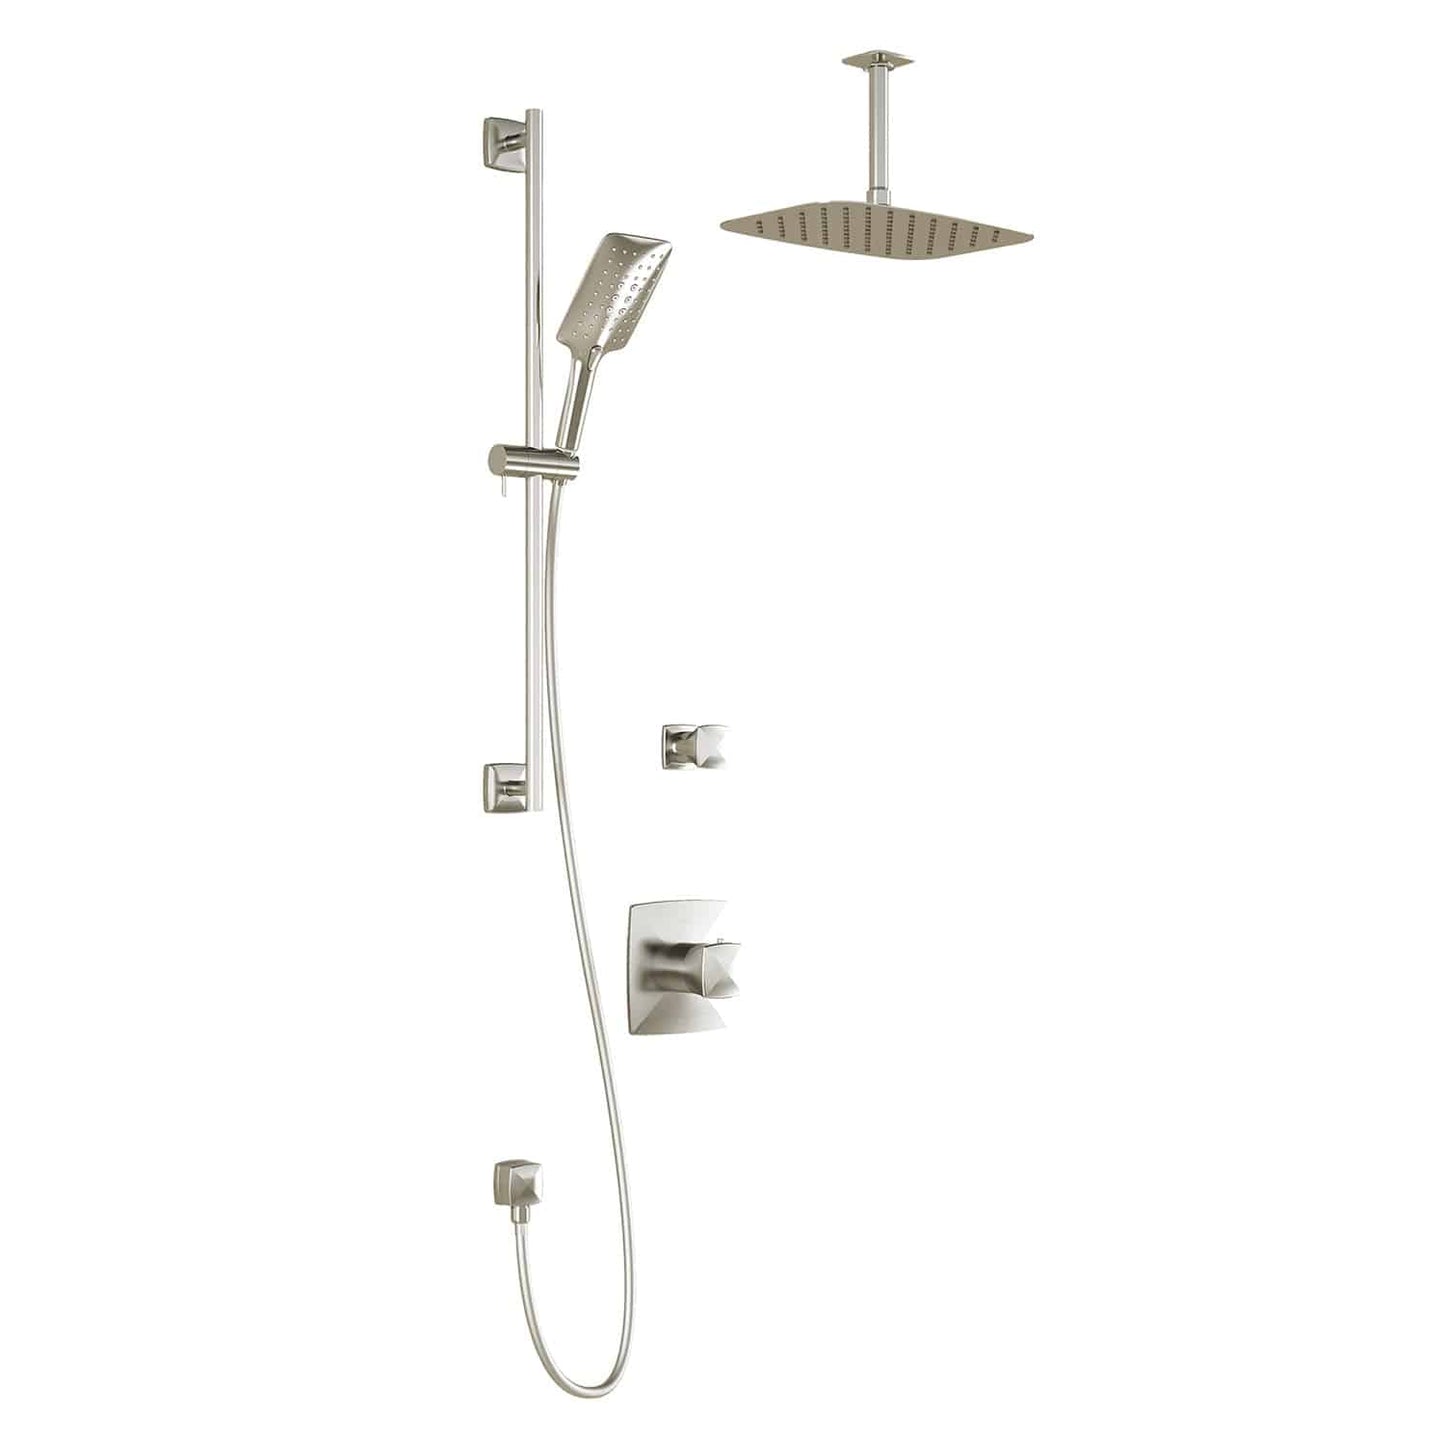 Kalia UMANI TD2 PREMIA AQUATONIK T/P Shower System with 11.75" Shower Head Hand Shower and Vertical Ceiling Arm -Brushed Nickel PVD